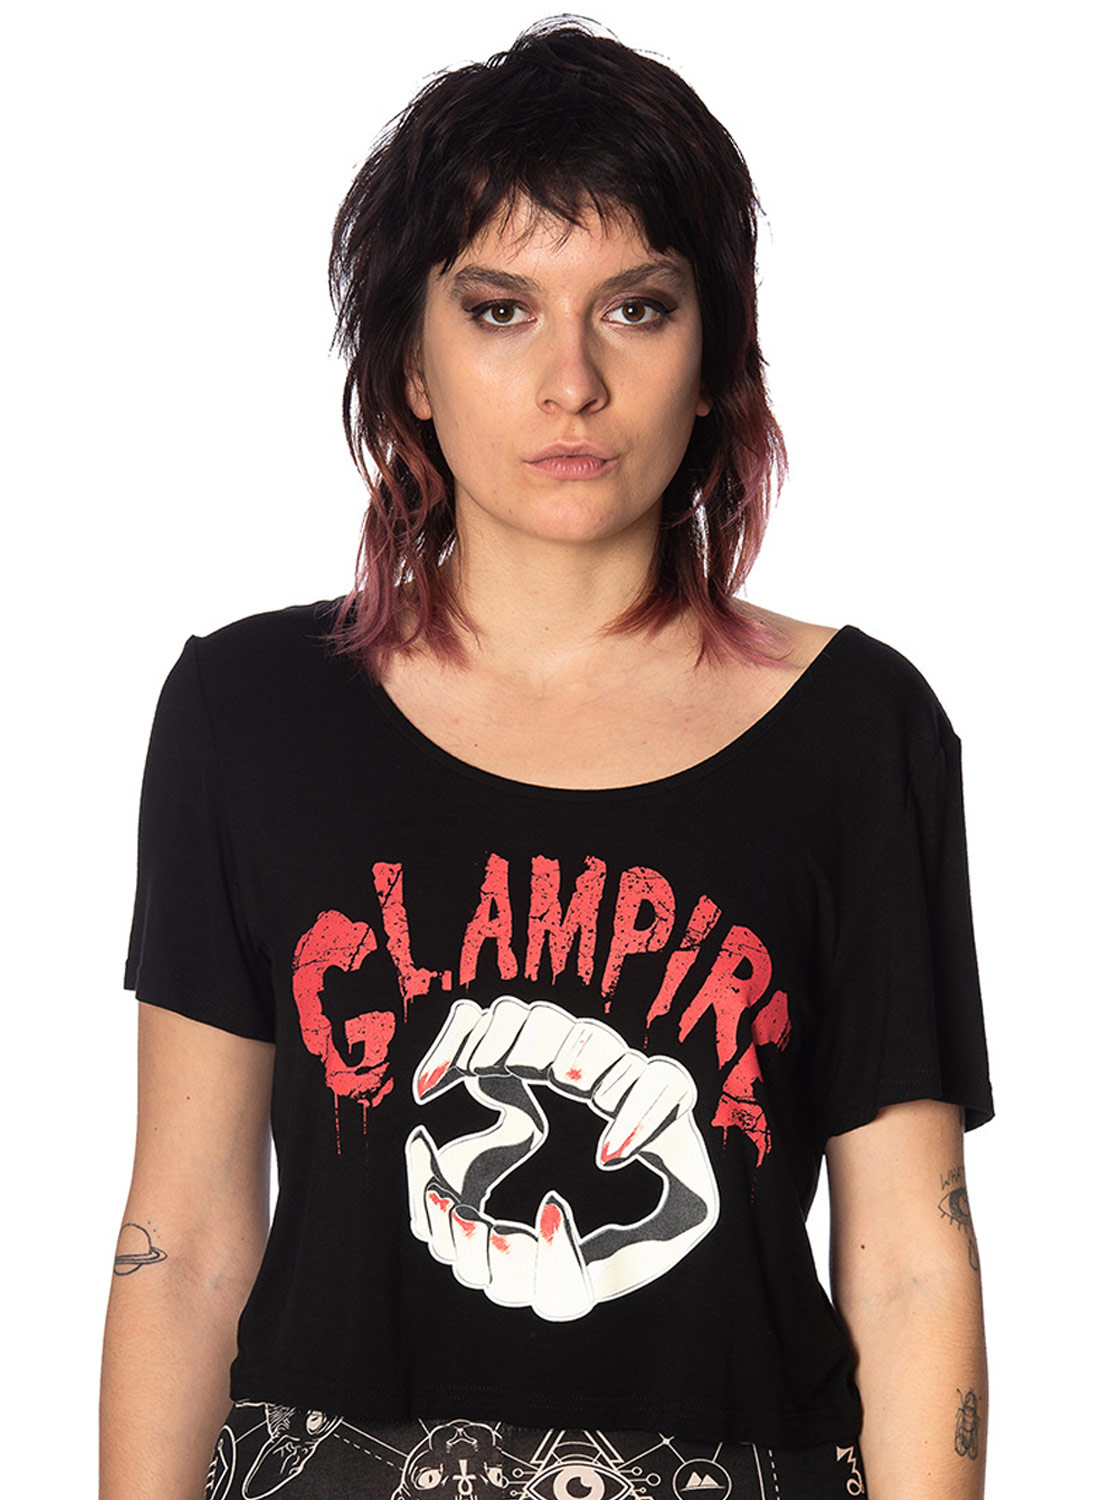 Glampire Top